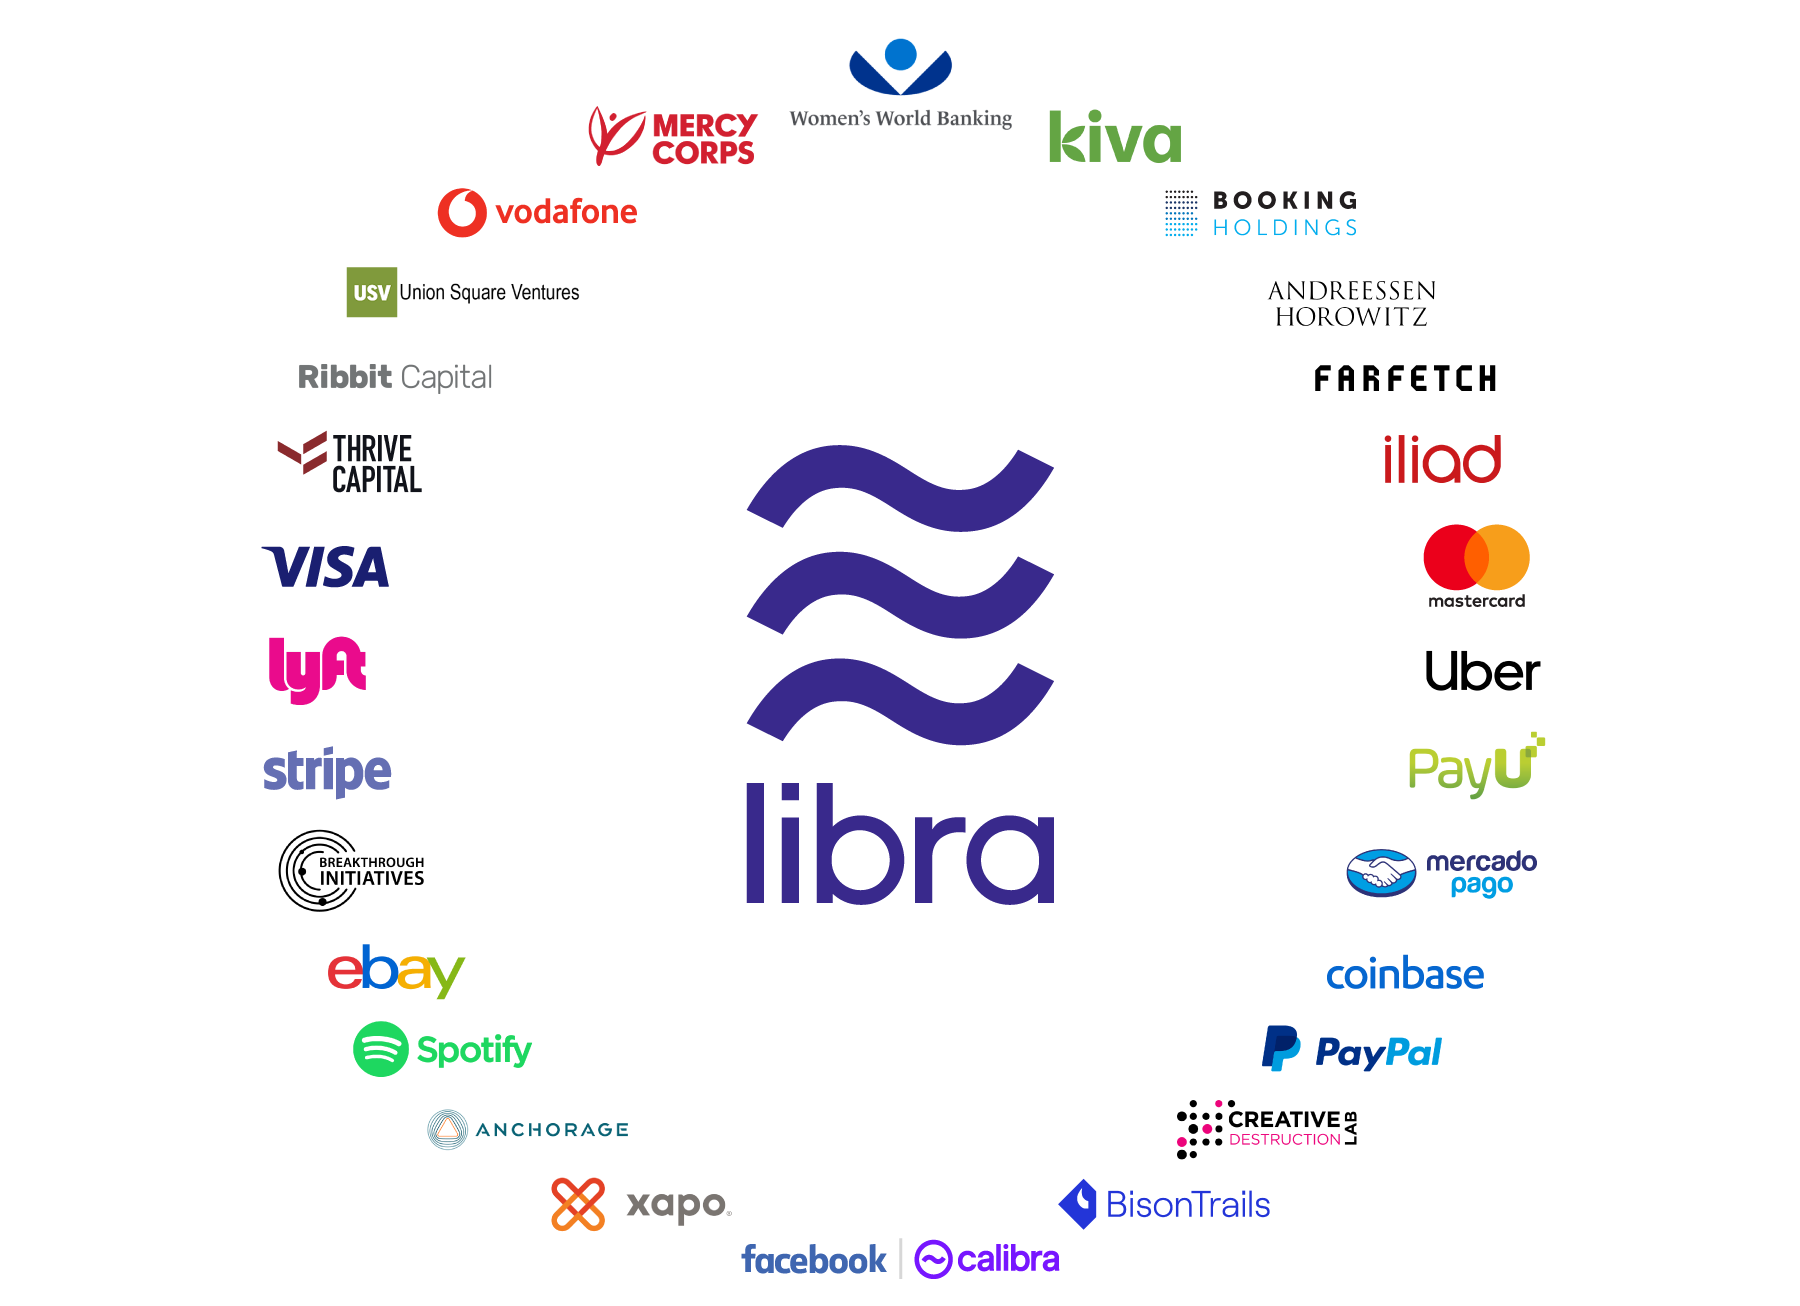 Facebook's Libra Coin: Everything You Need to Know